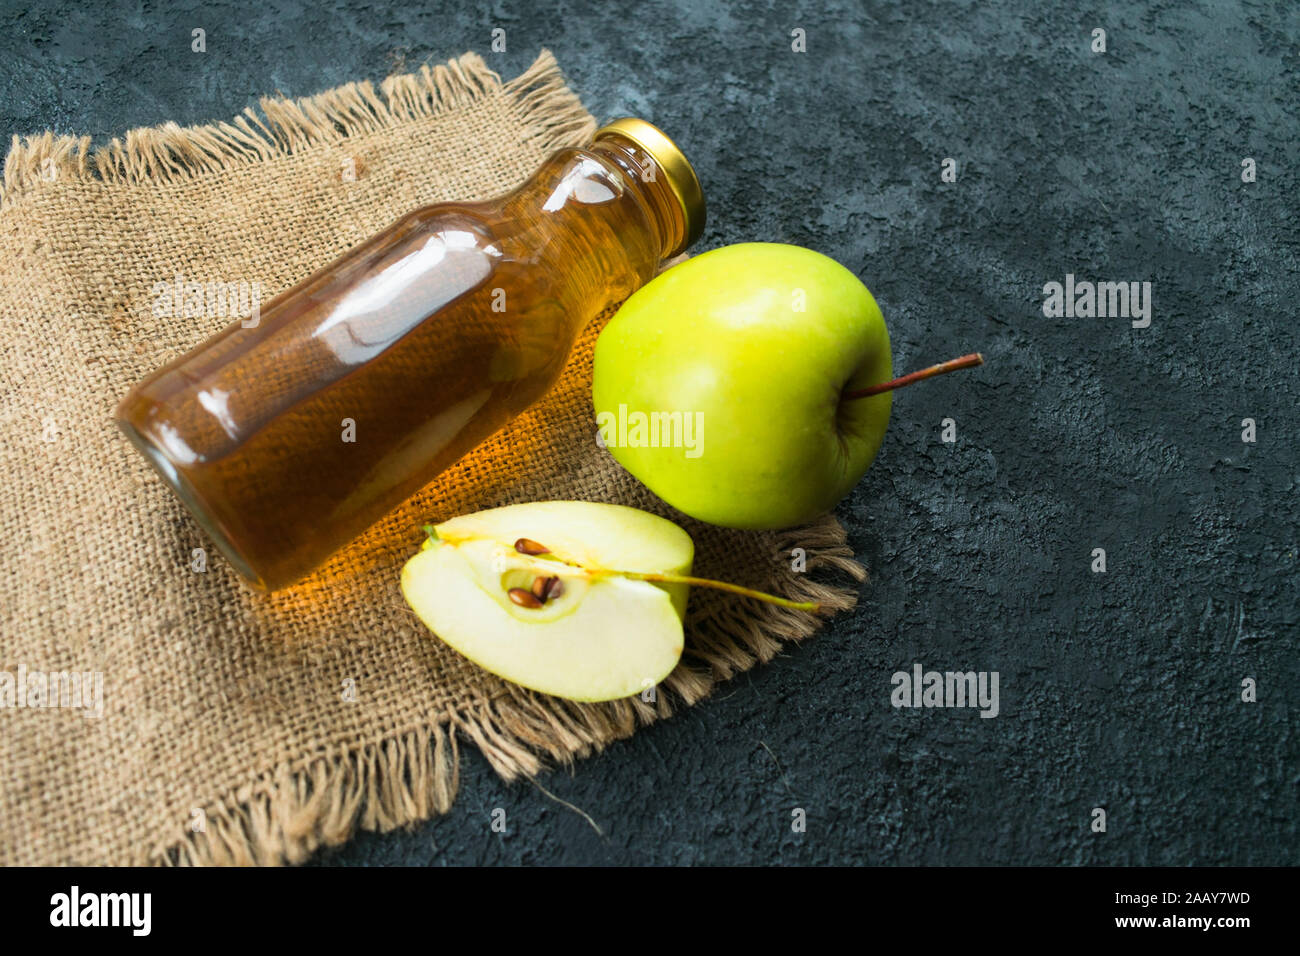 Apple juice in a bottle and a green apple on a black background. Flat lay. Copy space. Stock Photo